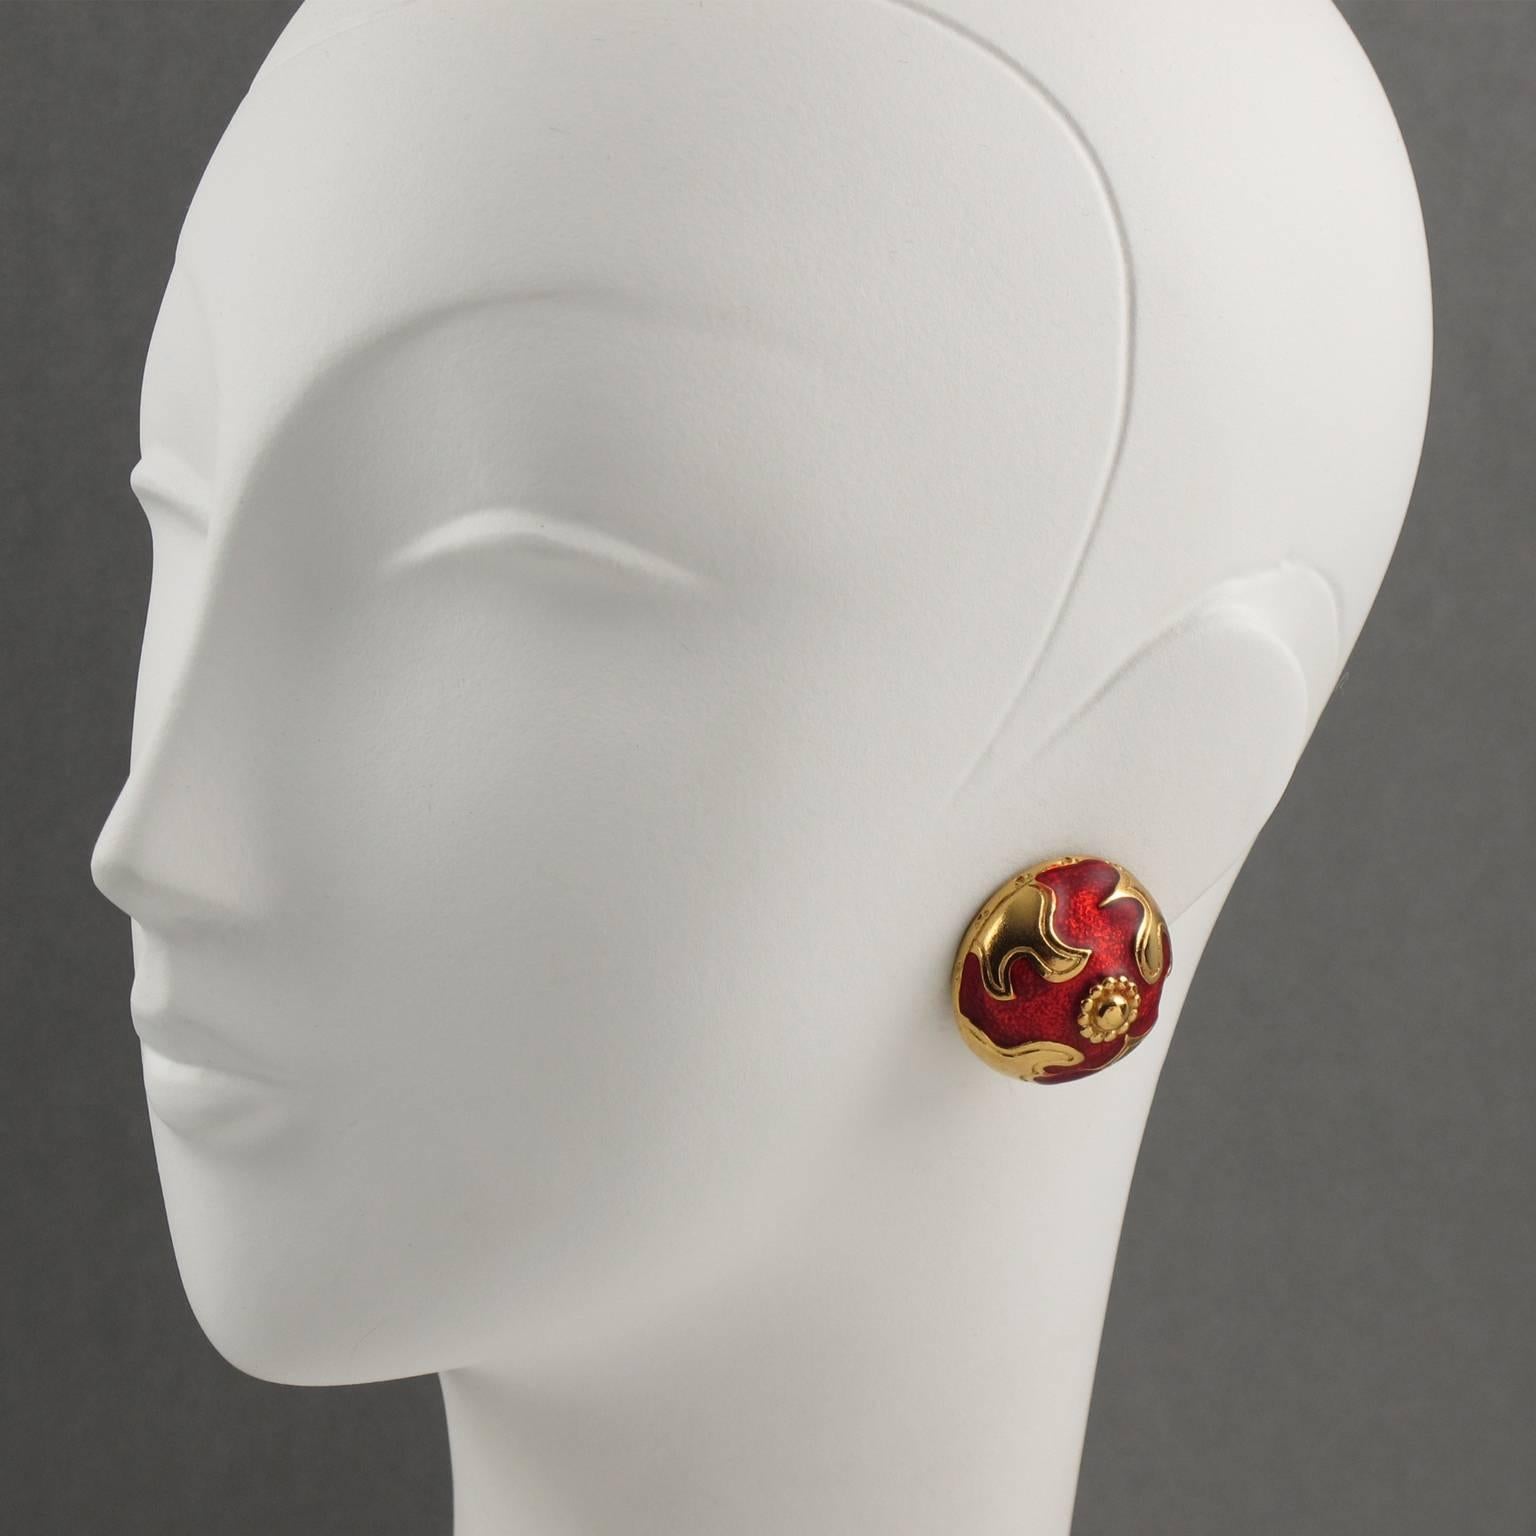 YVES SAINT LAURENT Paris signed clip on earrings. Baroque round domed shape, shinny gilt metal with texture ornate with bright red enamel. Signed at the back with YSL pierced logo on clip and engraved underside: "YSL logo". Excellent